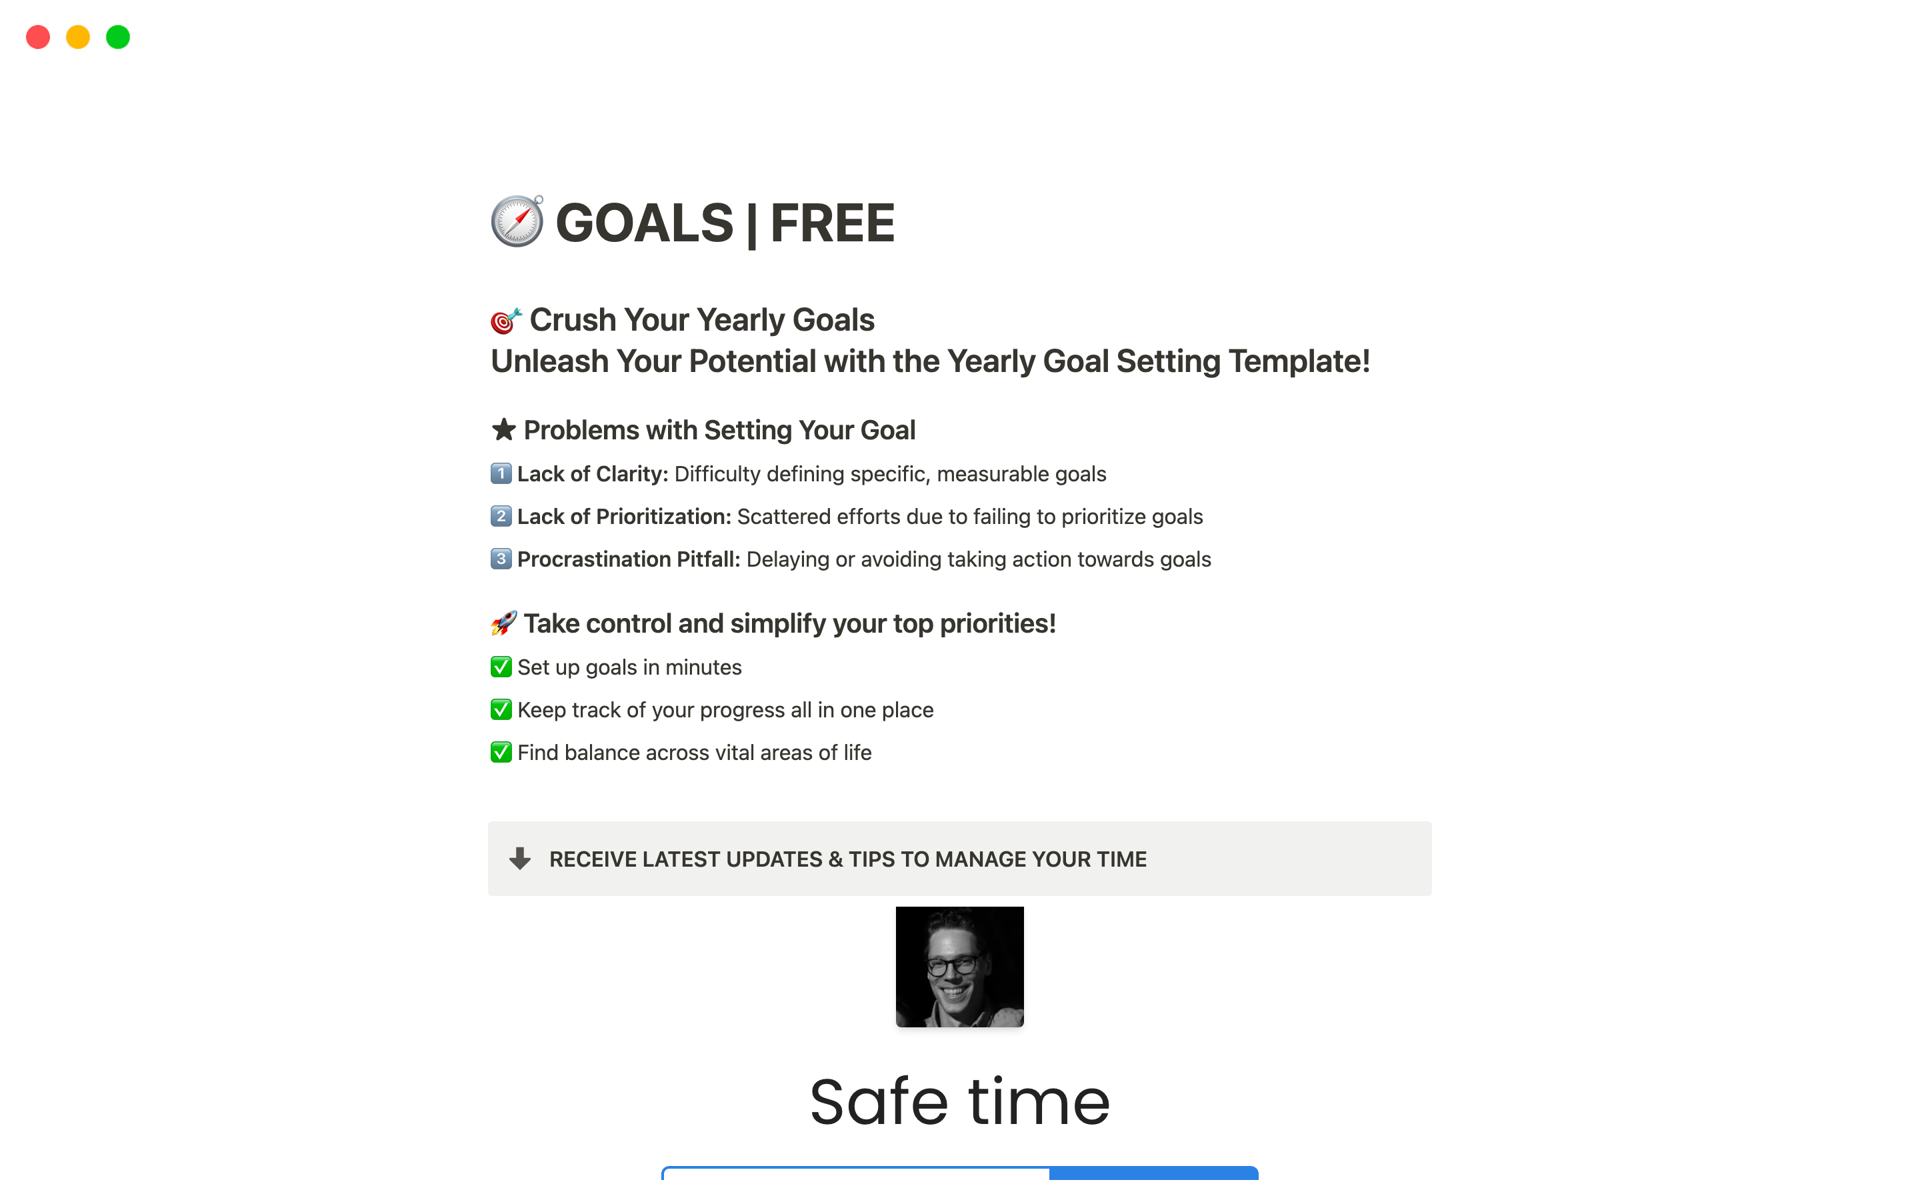 Set up goals in minutes. Keep track of your progress in one place.